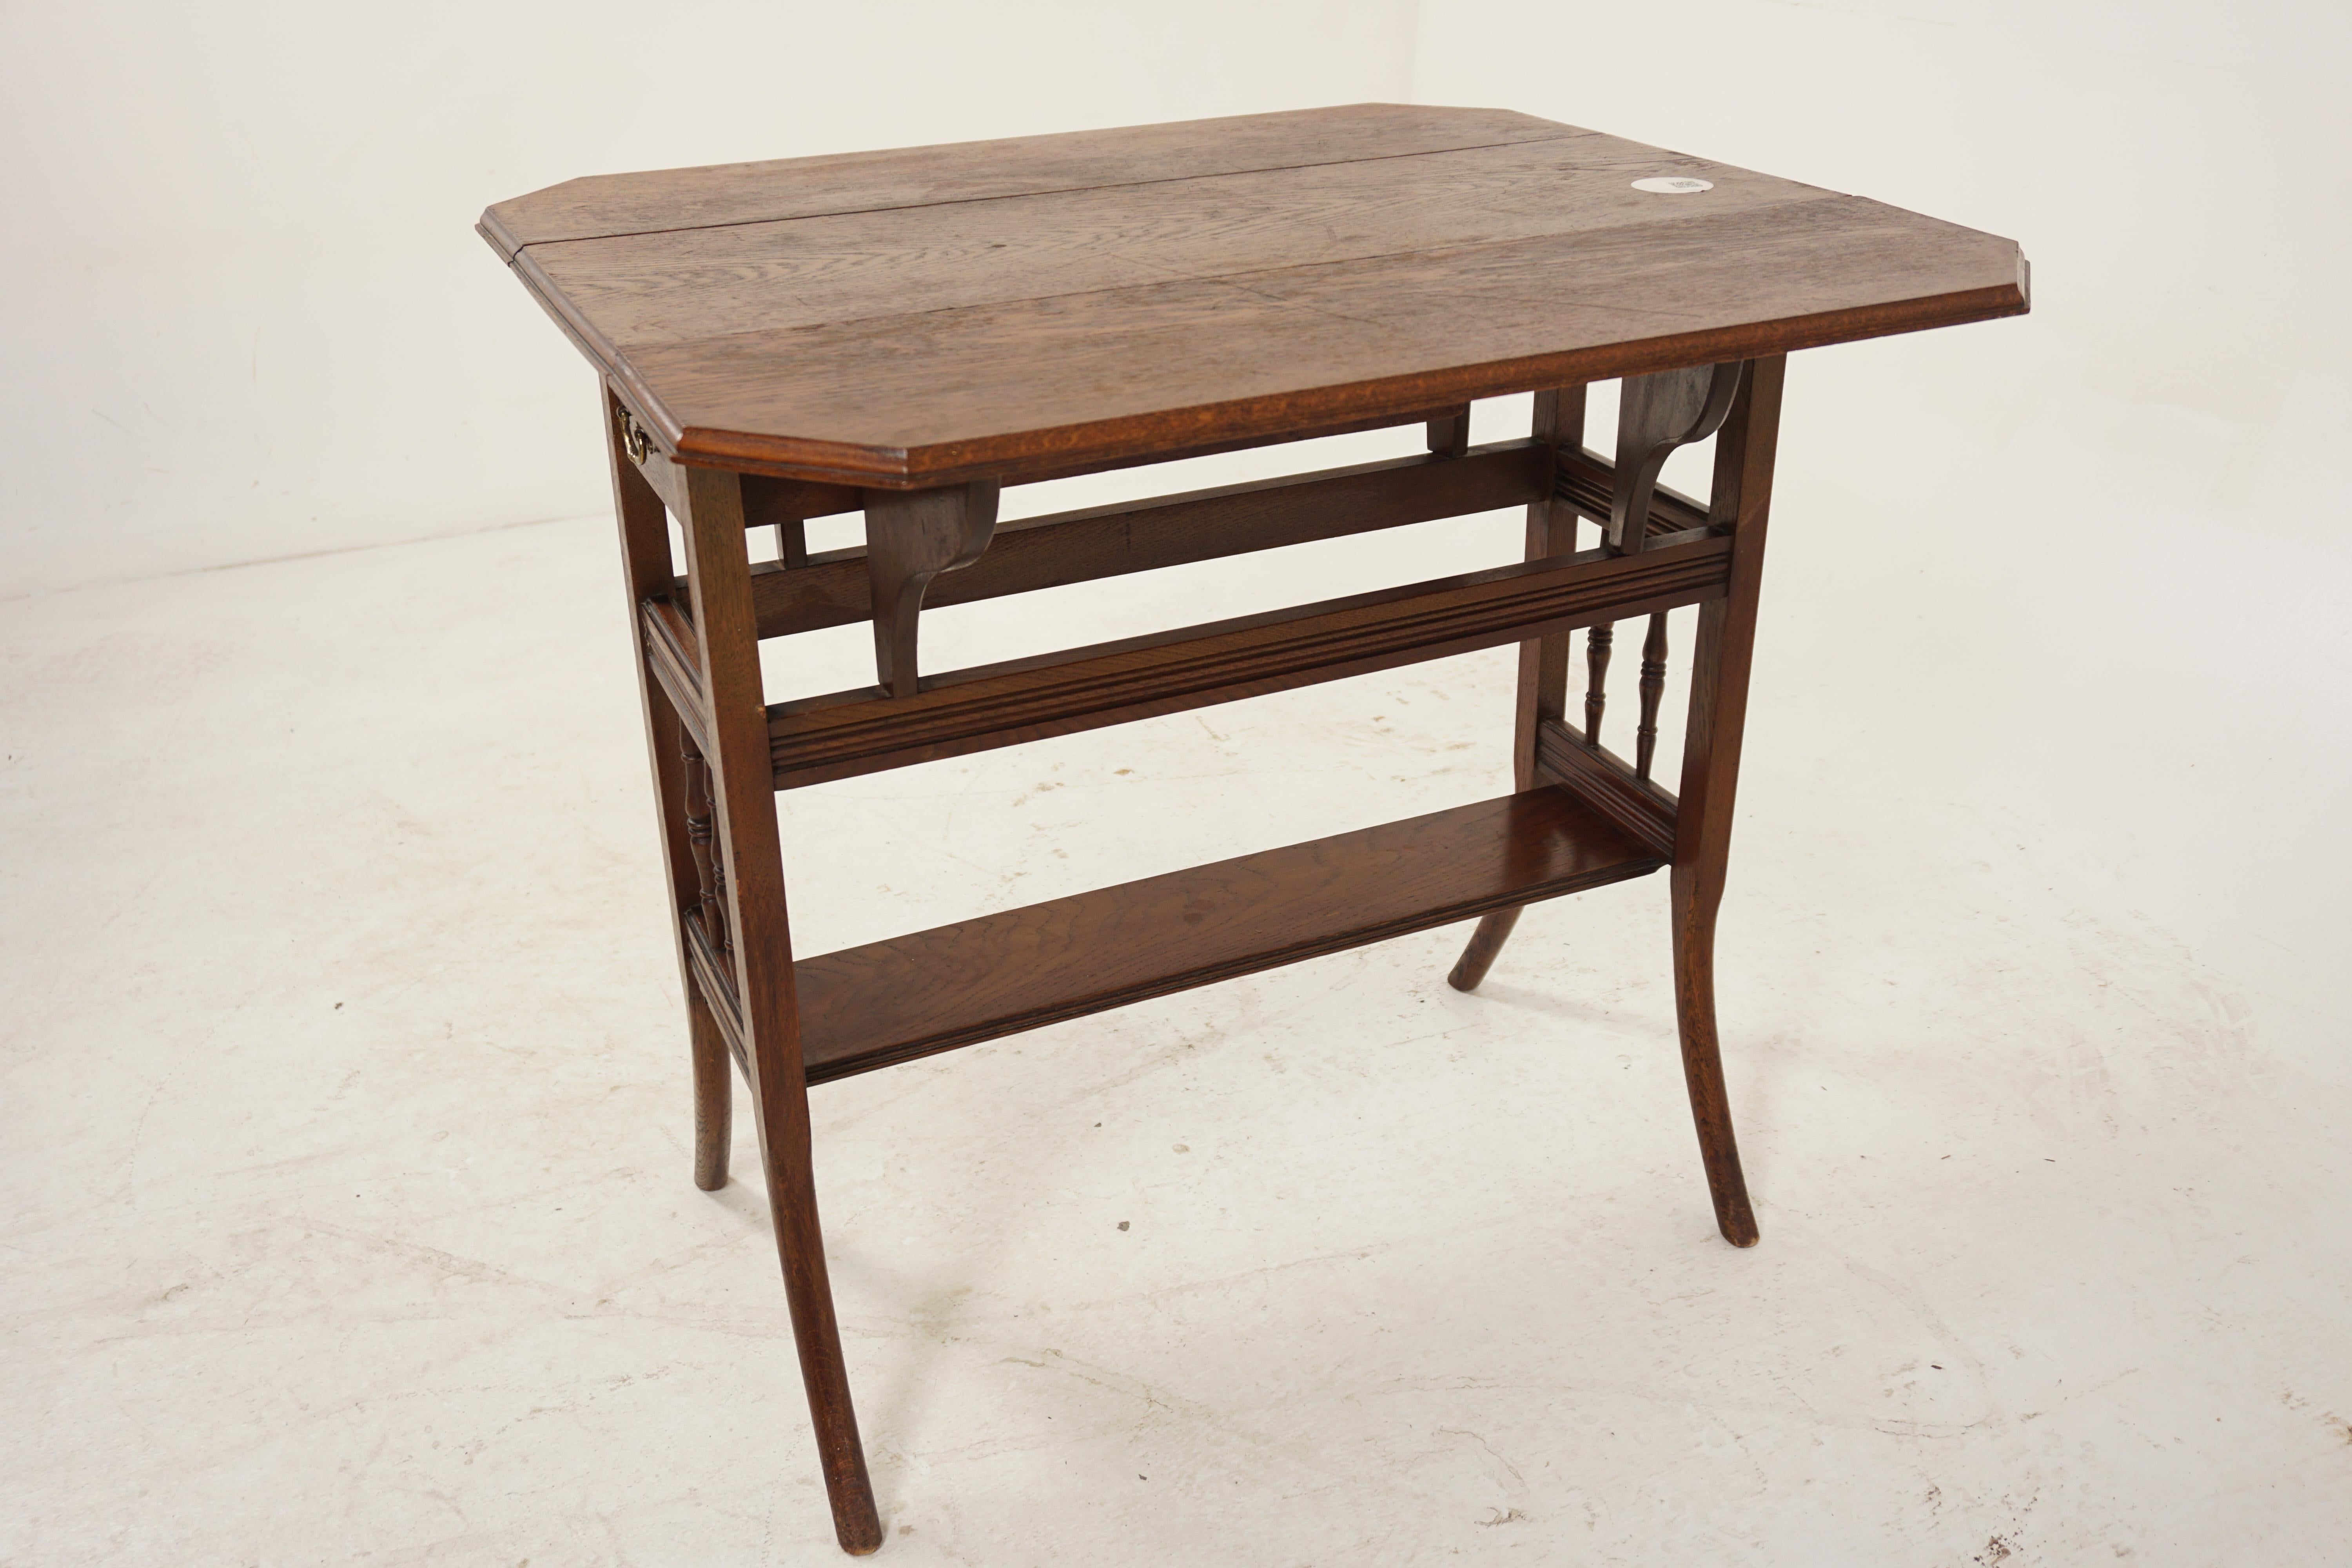 Late 19th Century Antique Oak Table, Gateleg Drop Leaf Table with Drawers, Scotland 1890, H1093 For Sale